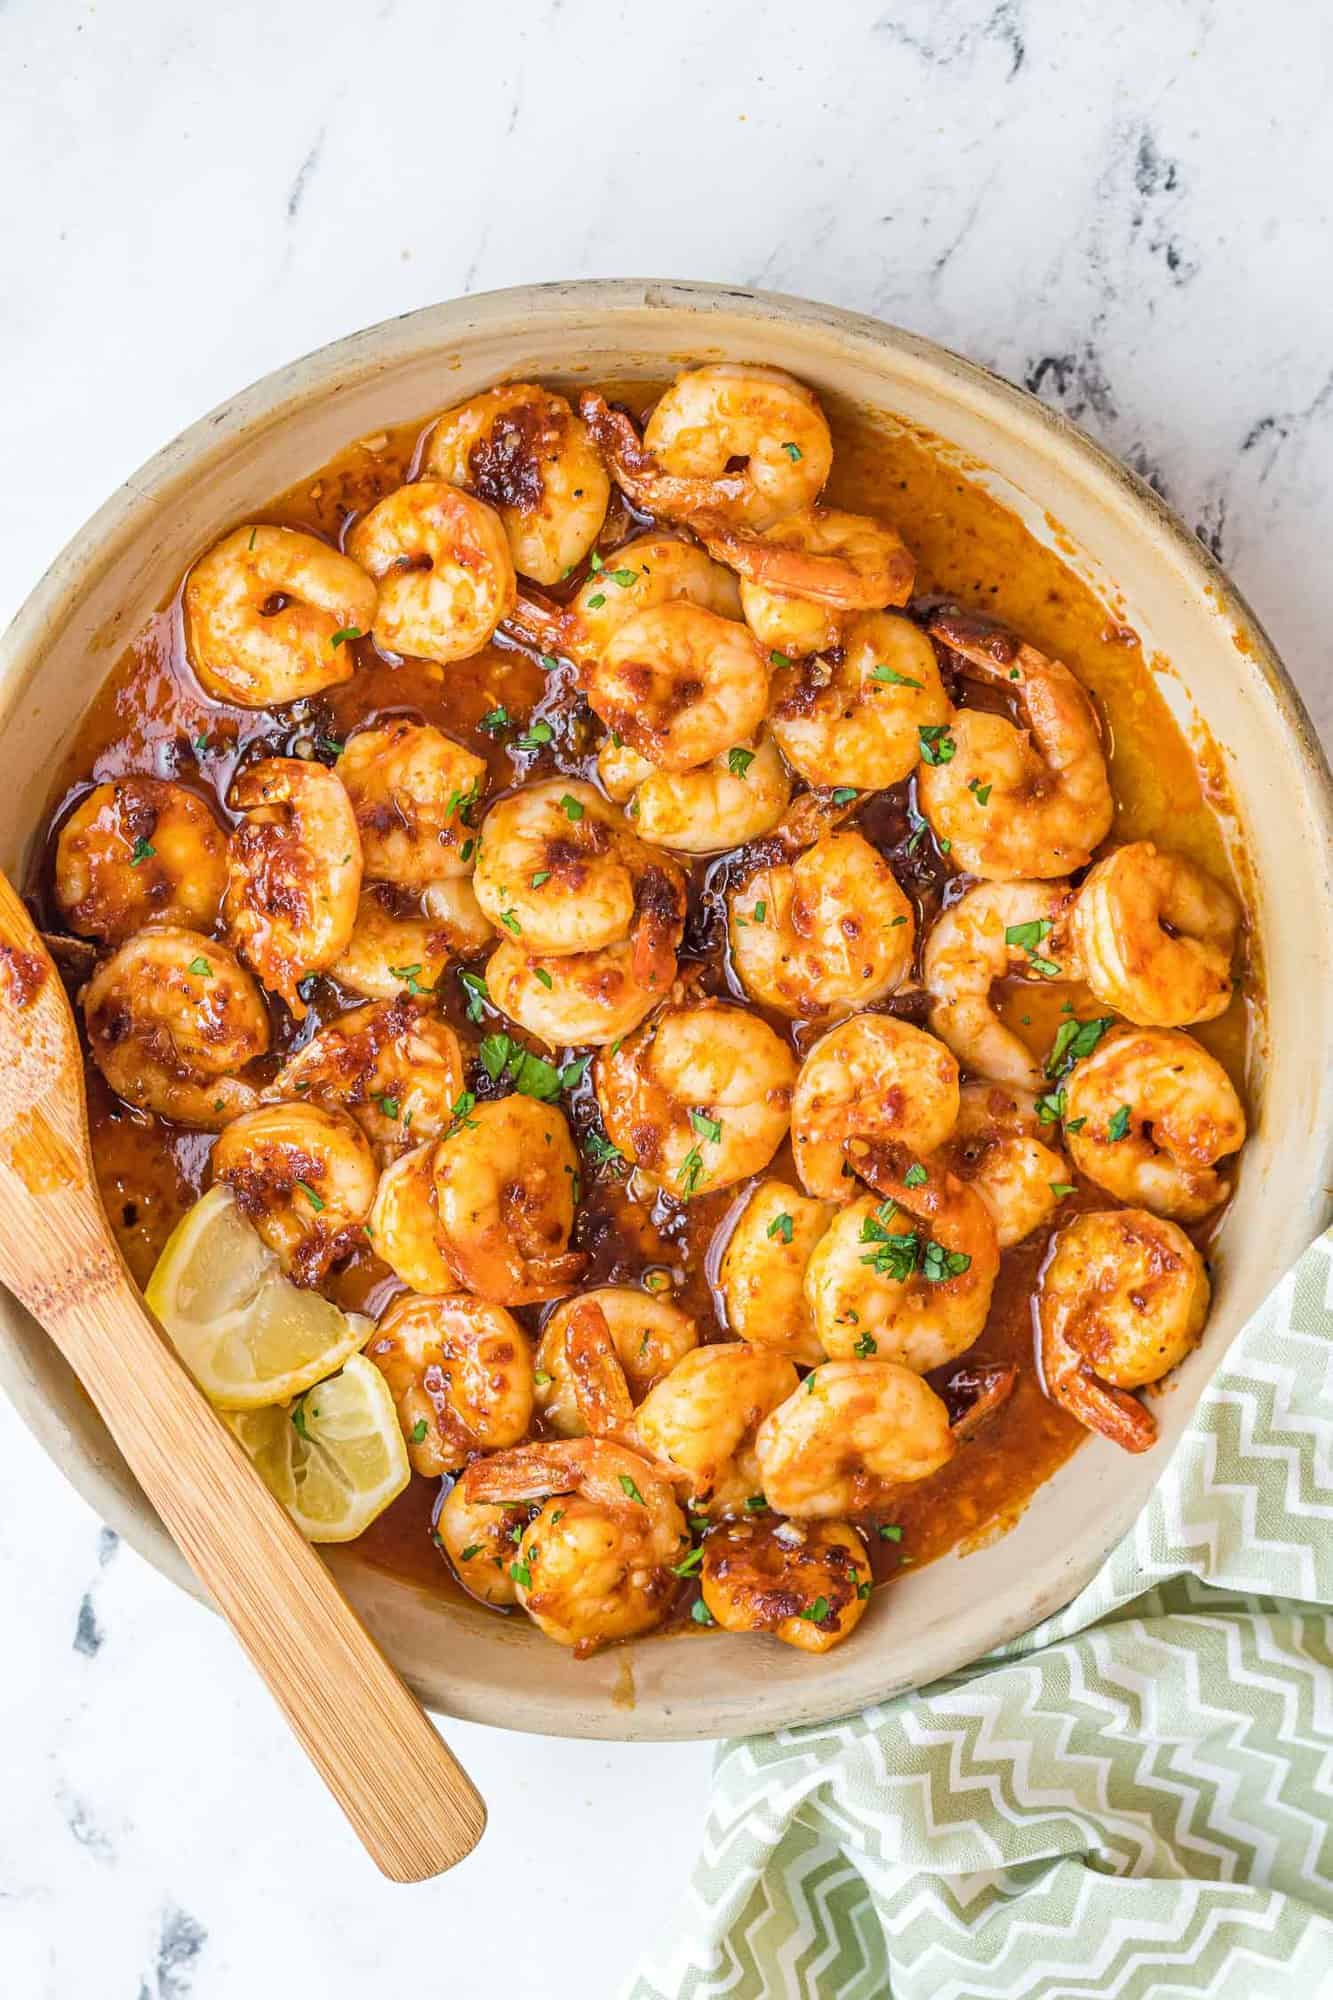 Cooked seasoned shrimp in a bowl with parsley and lemon.